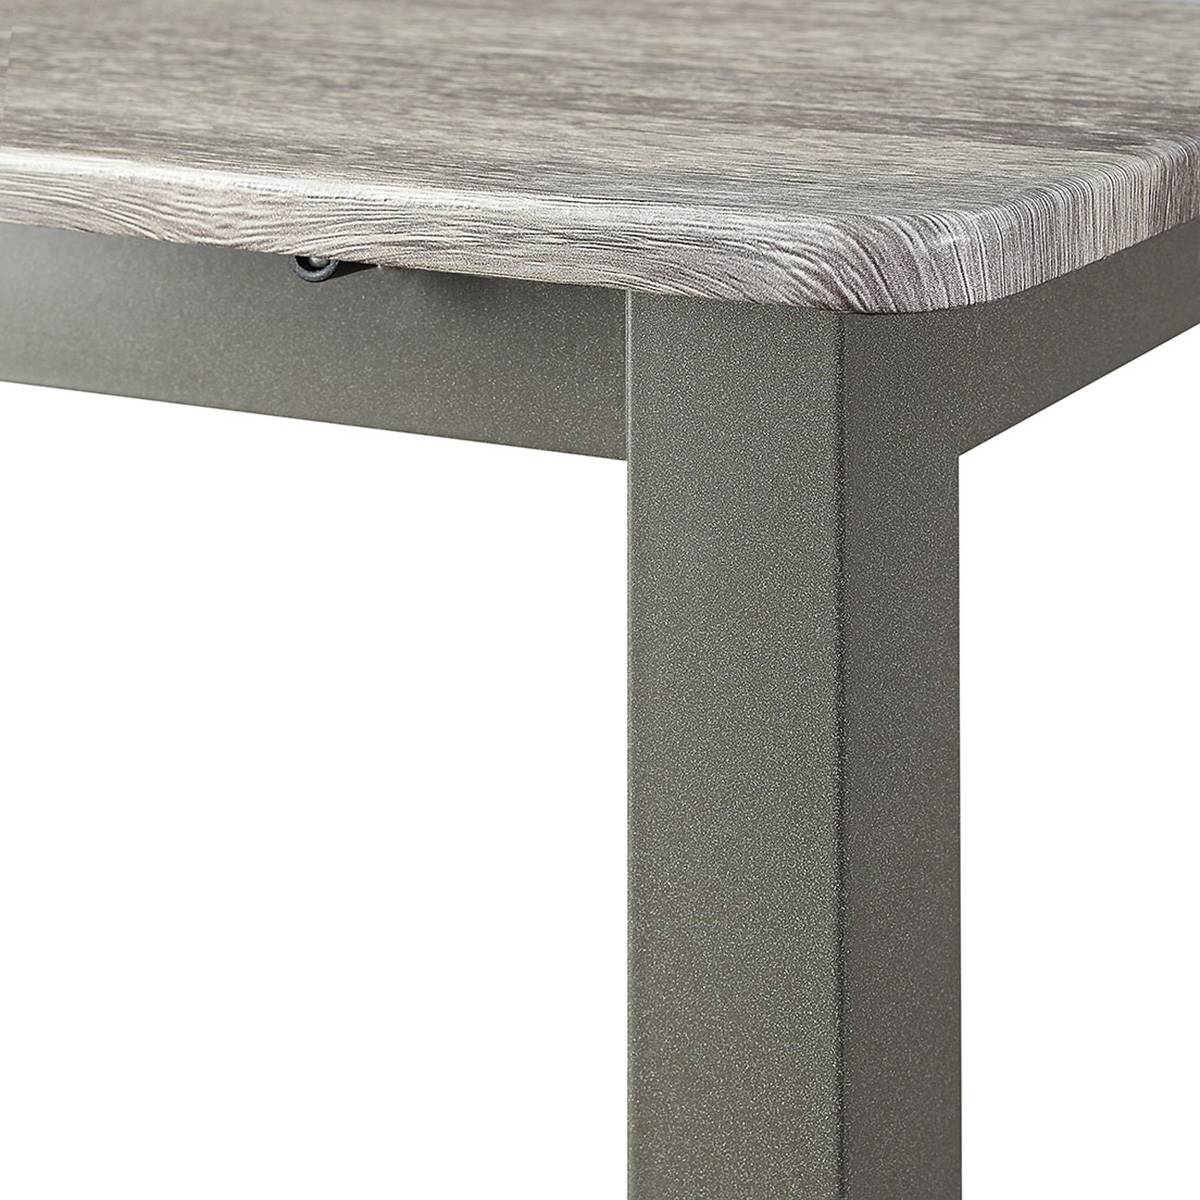 4D Concepts Toolless Boltzero Grey Dining Table W/ 2 Benches